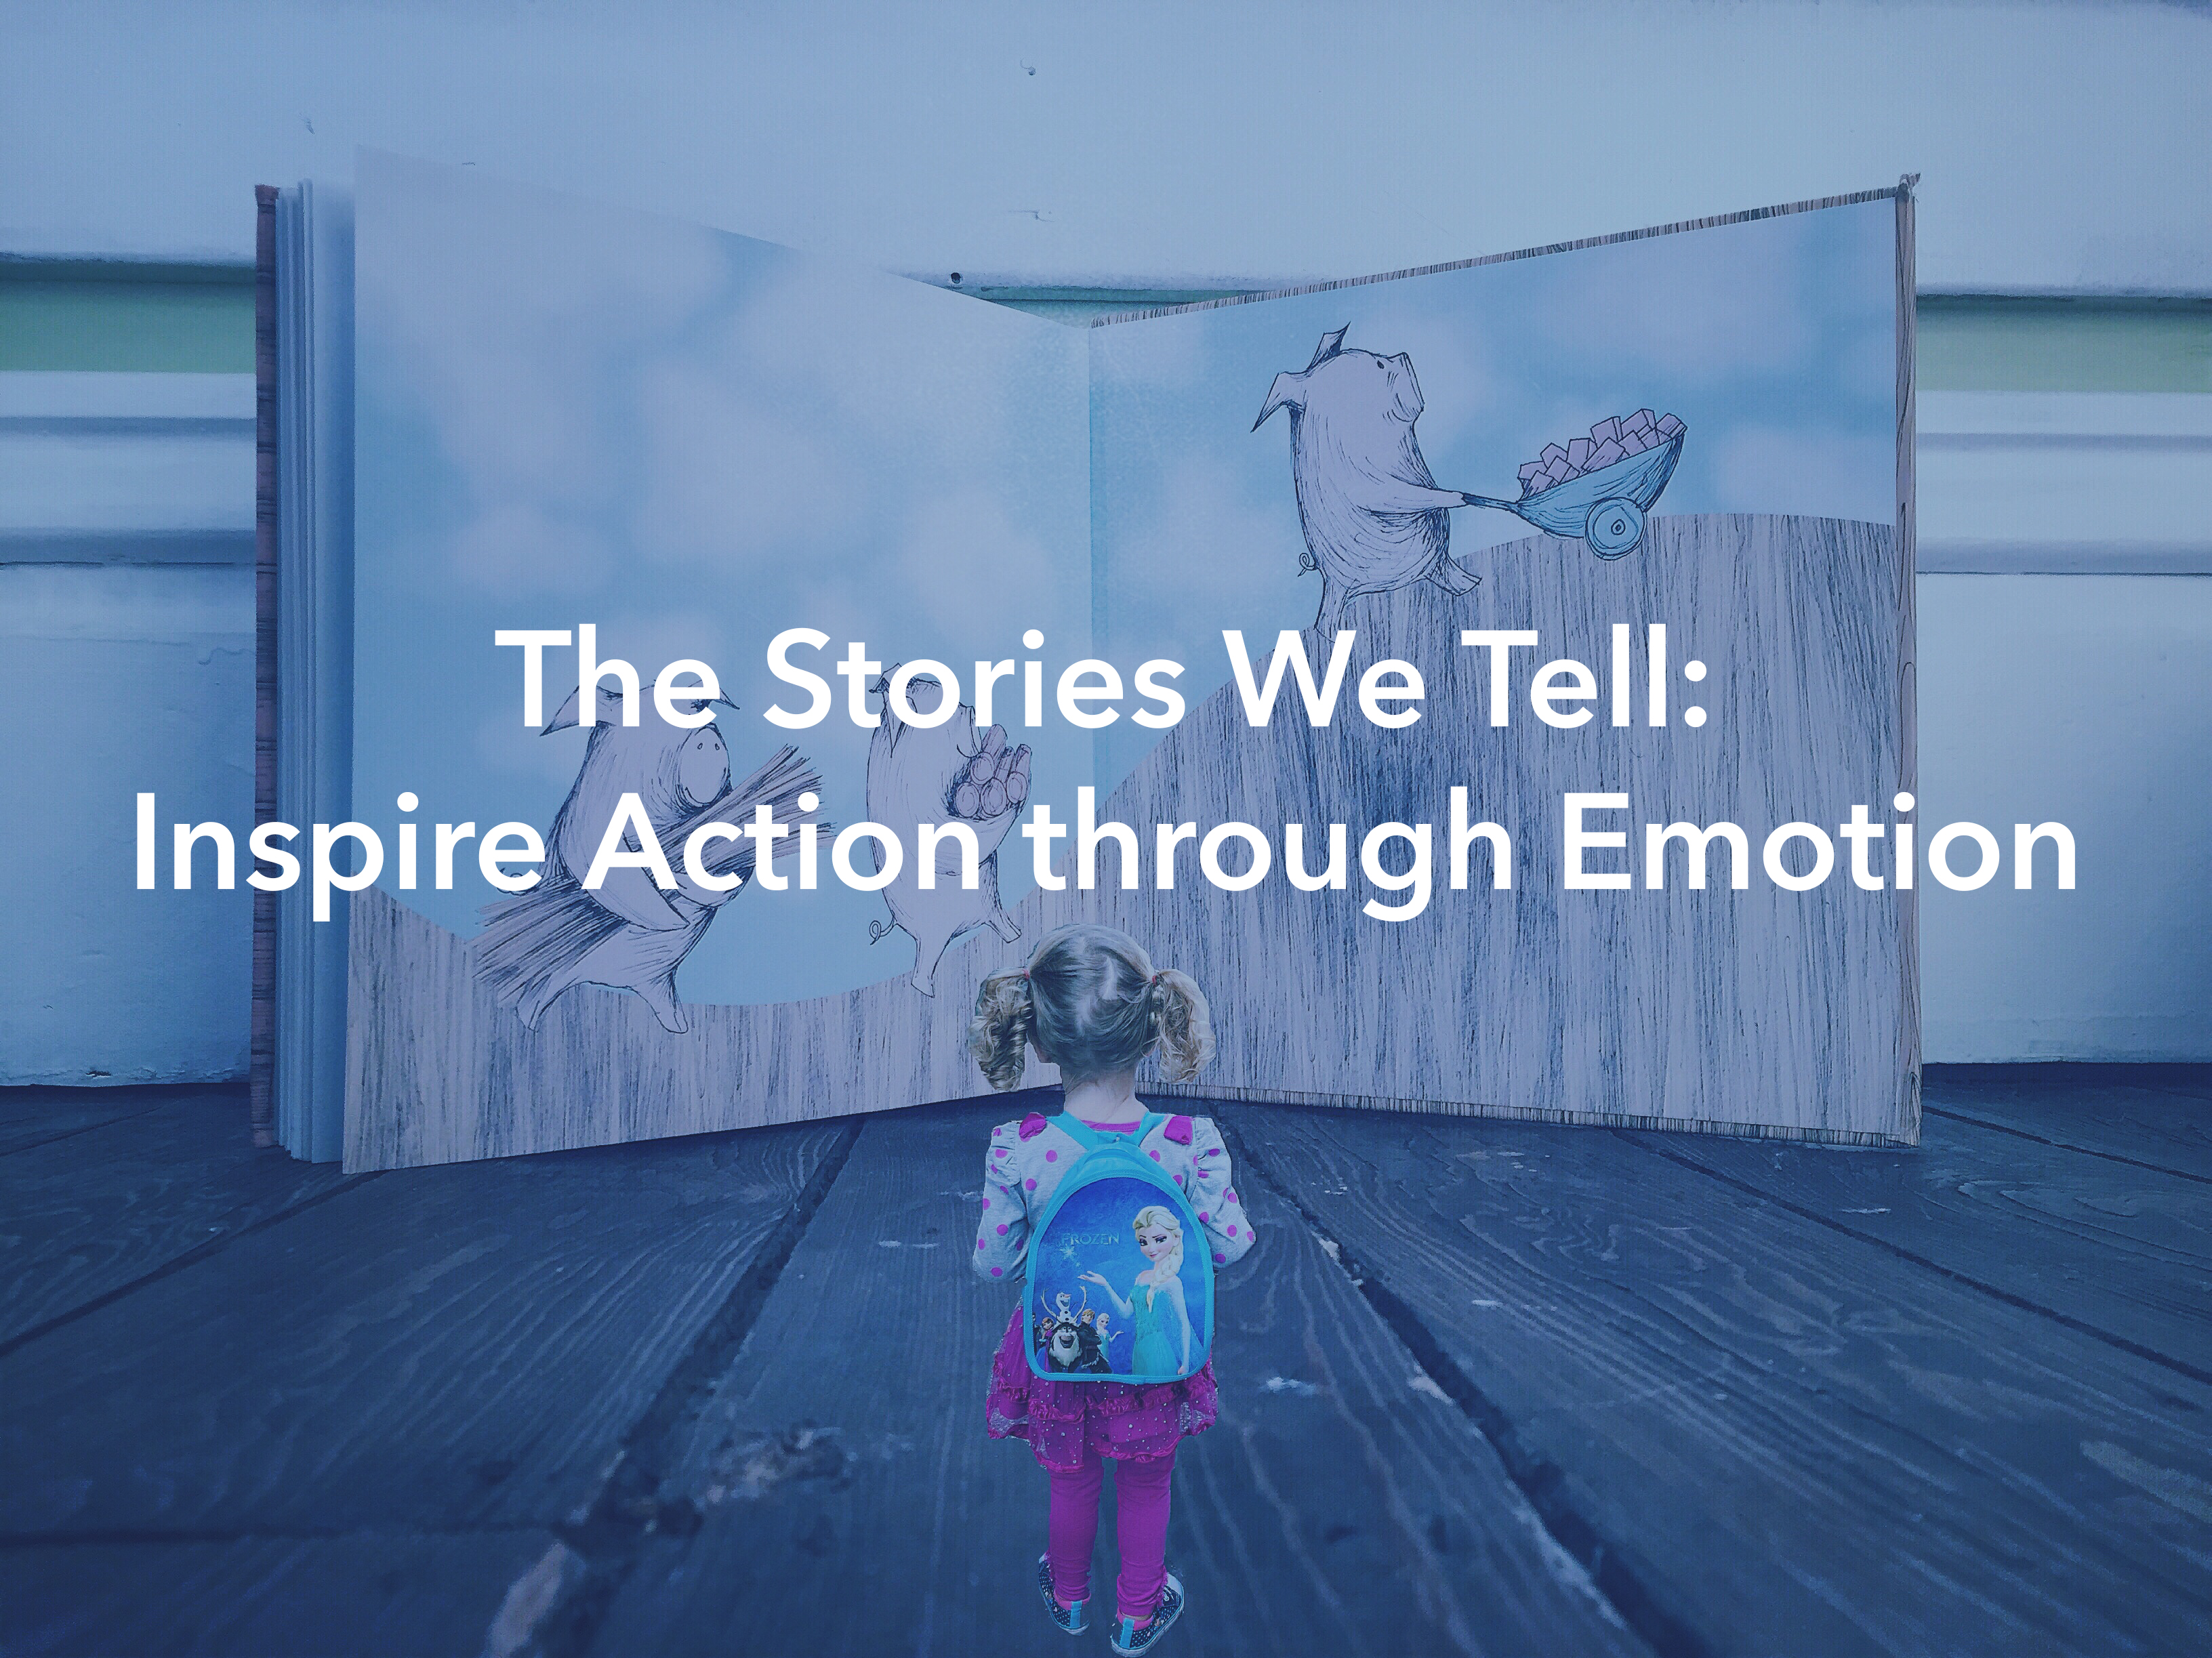 The Stories We Tell: Inspire Action Through Emotion